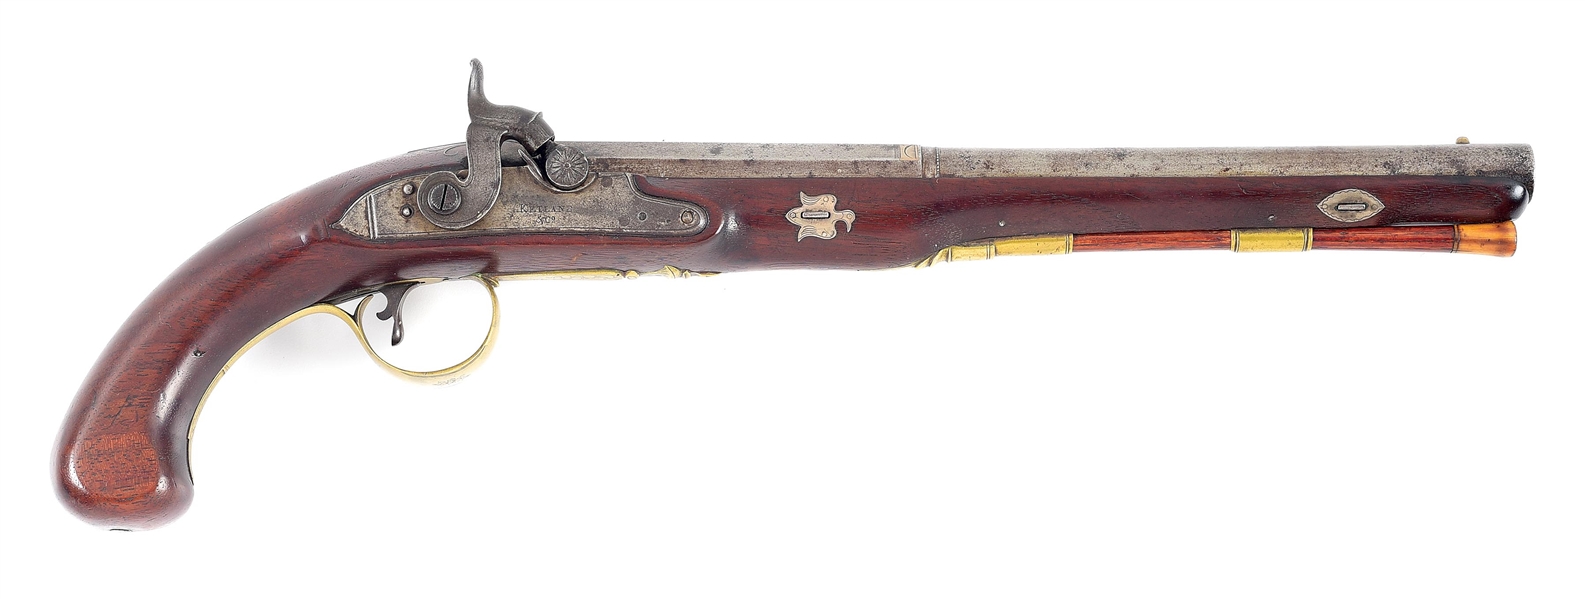 (A) FINE SILVER INLAID CHARLES EVERETT SILVER MOUNTED PISTOL.